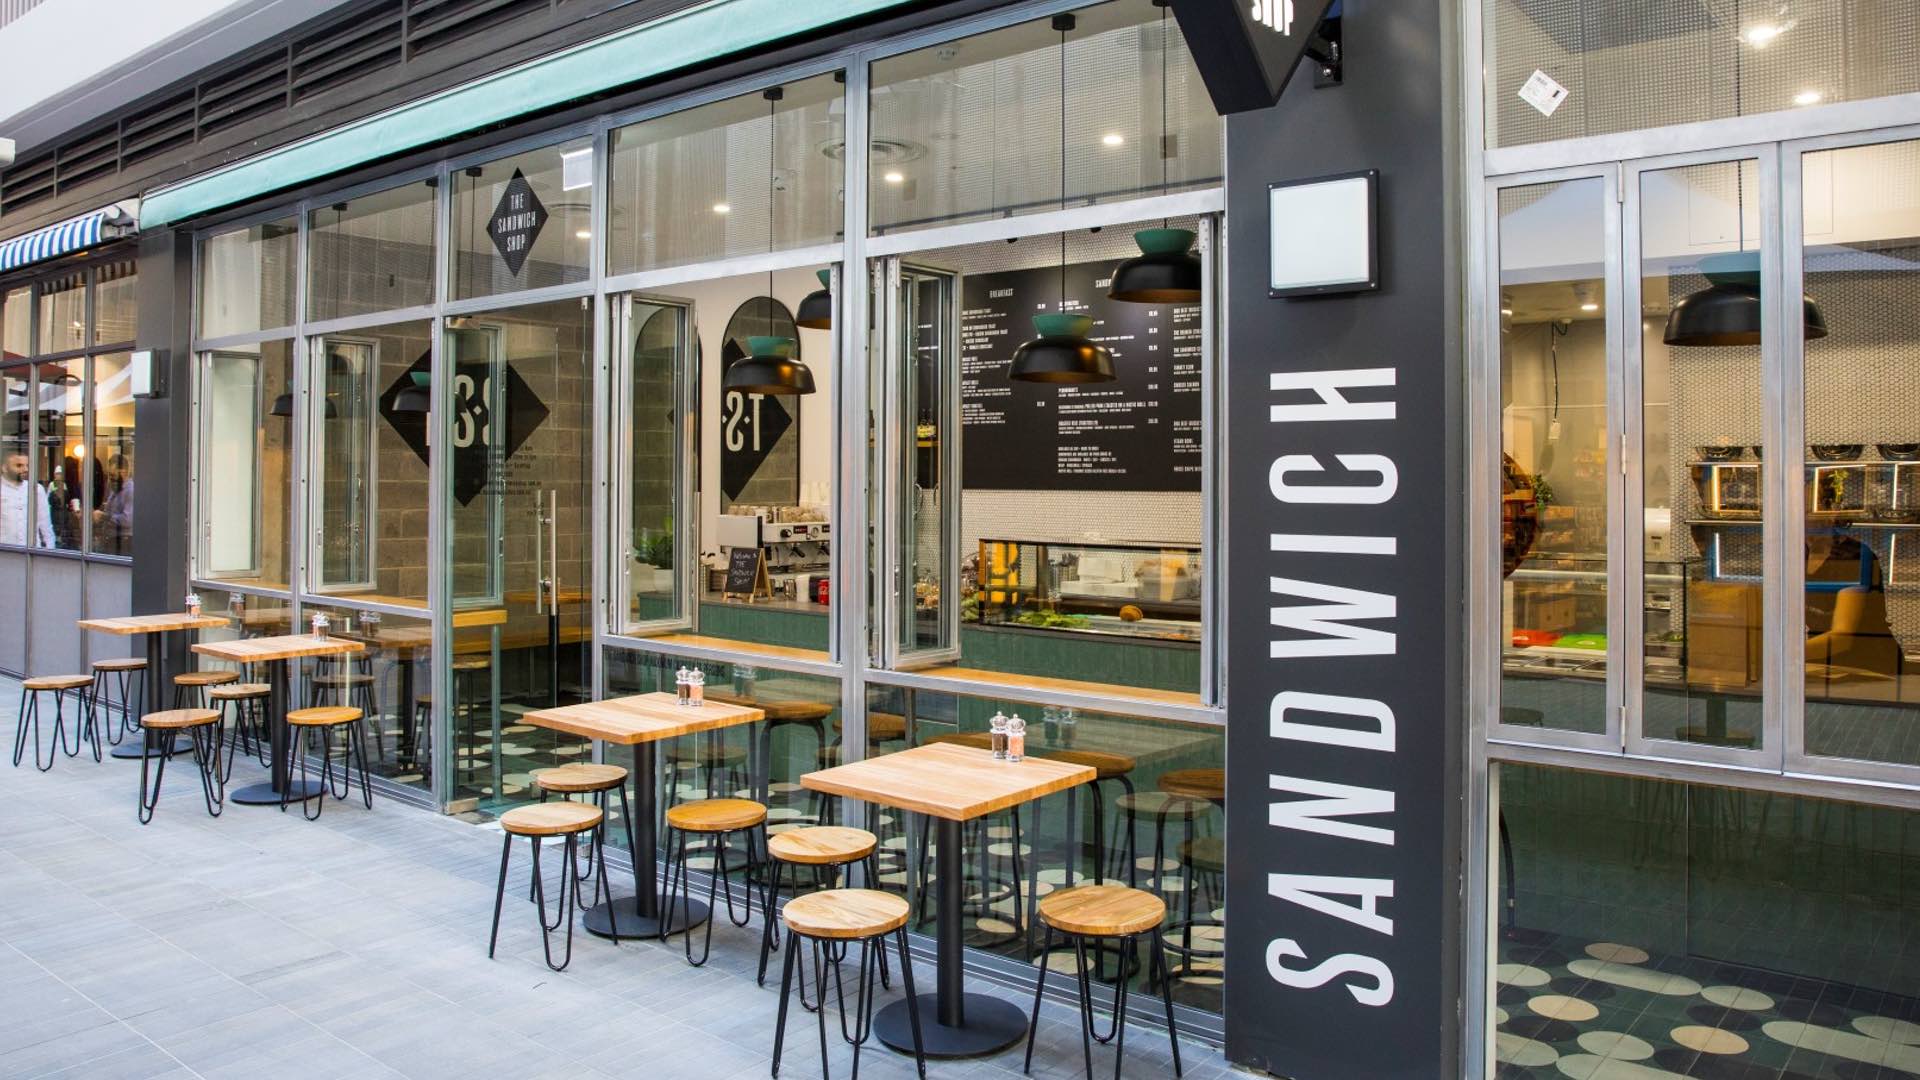 Sydney's New Darling Square Food Precinct Steam Mill Lane Is Now Open